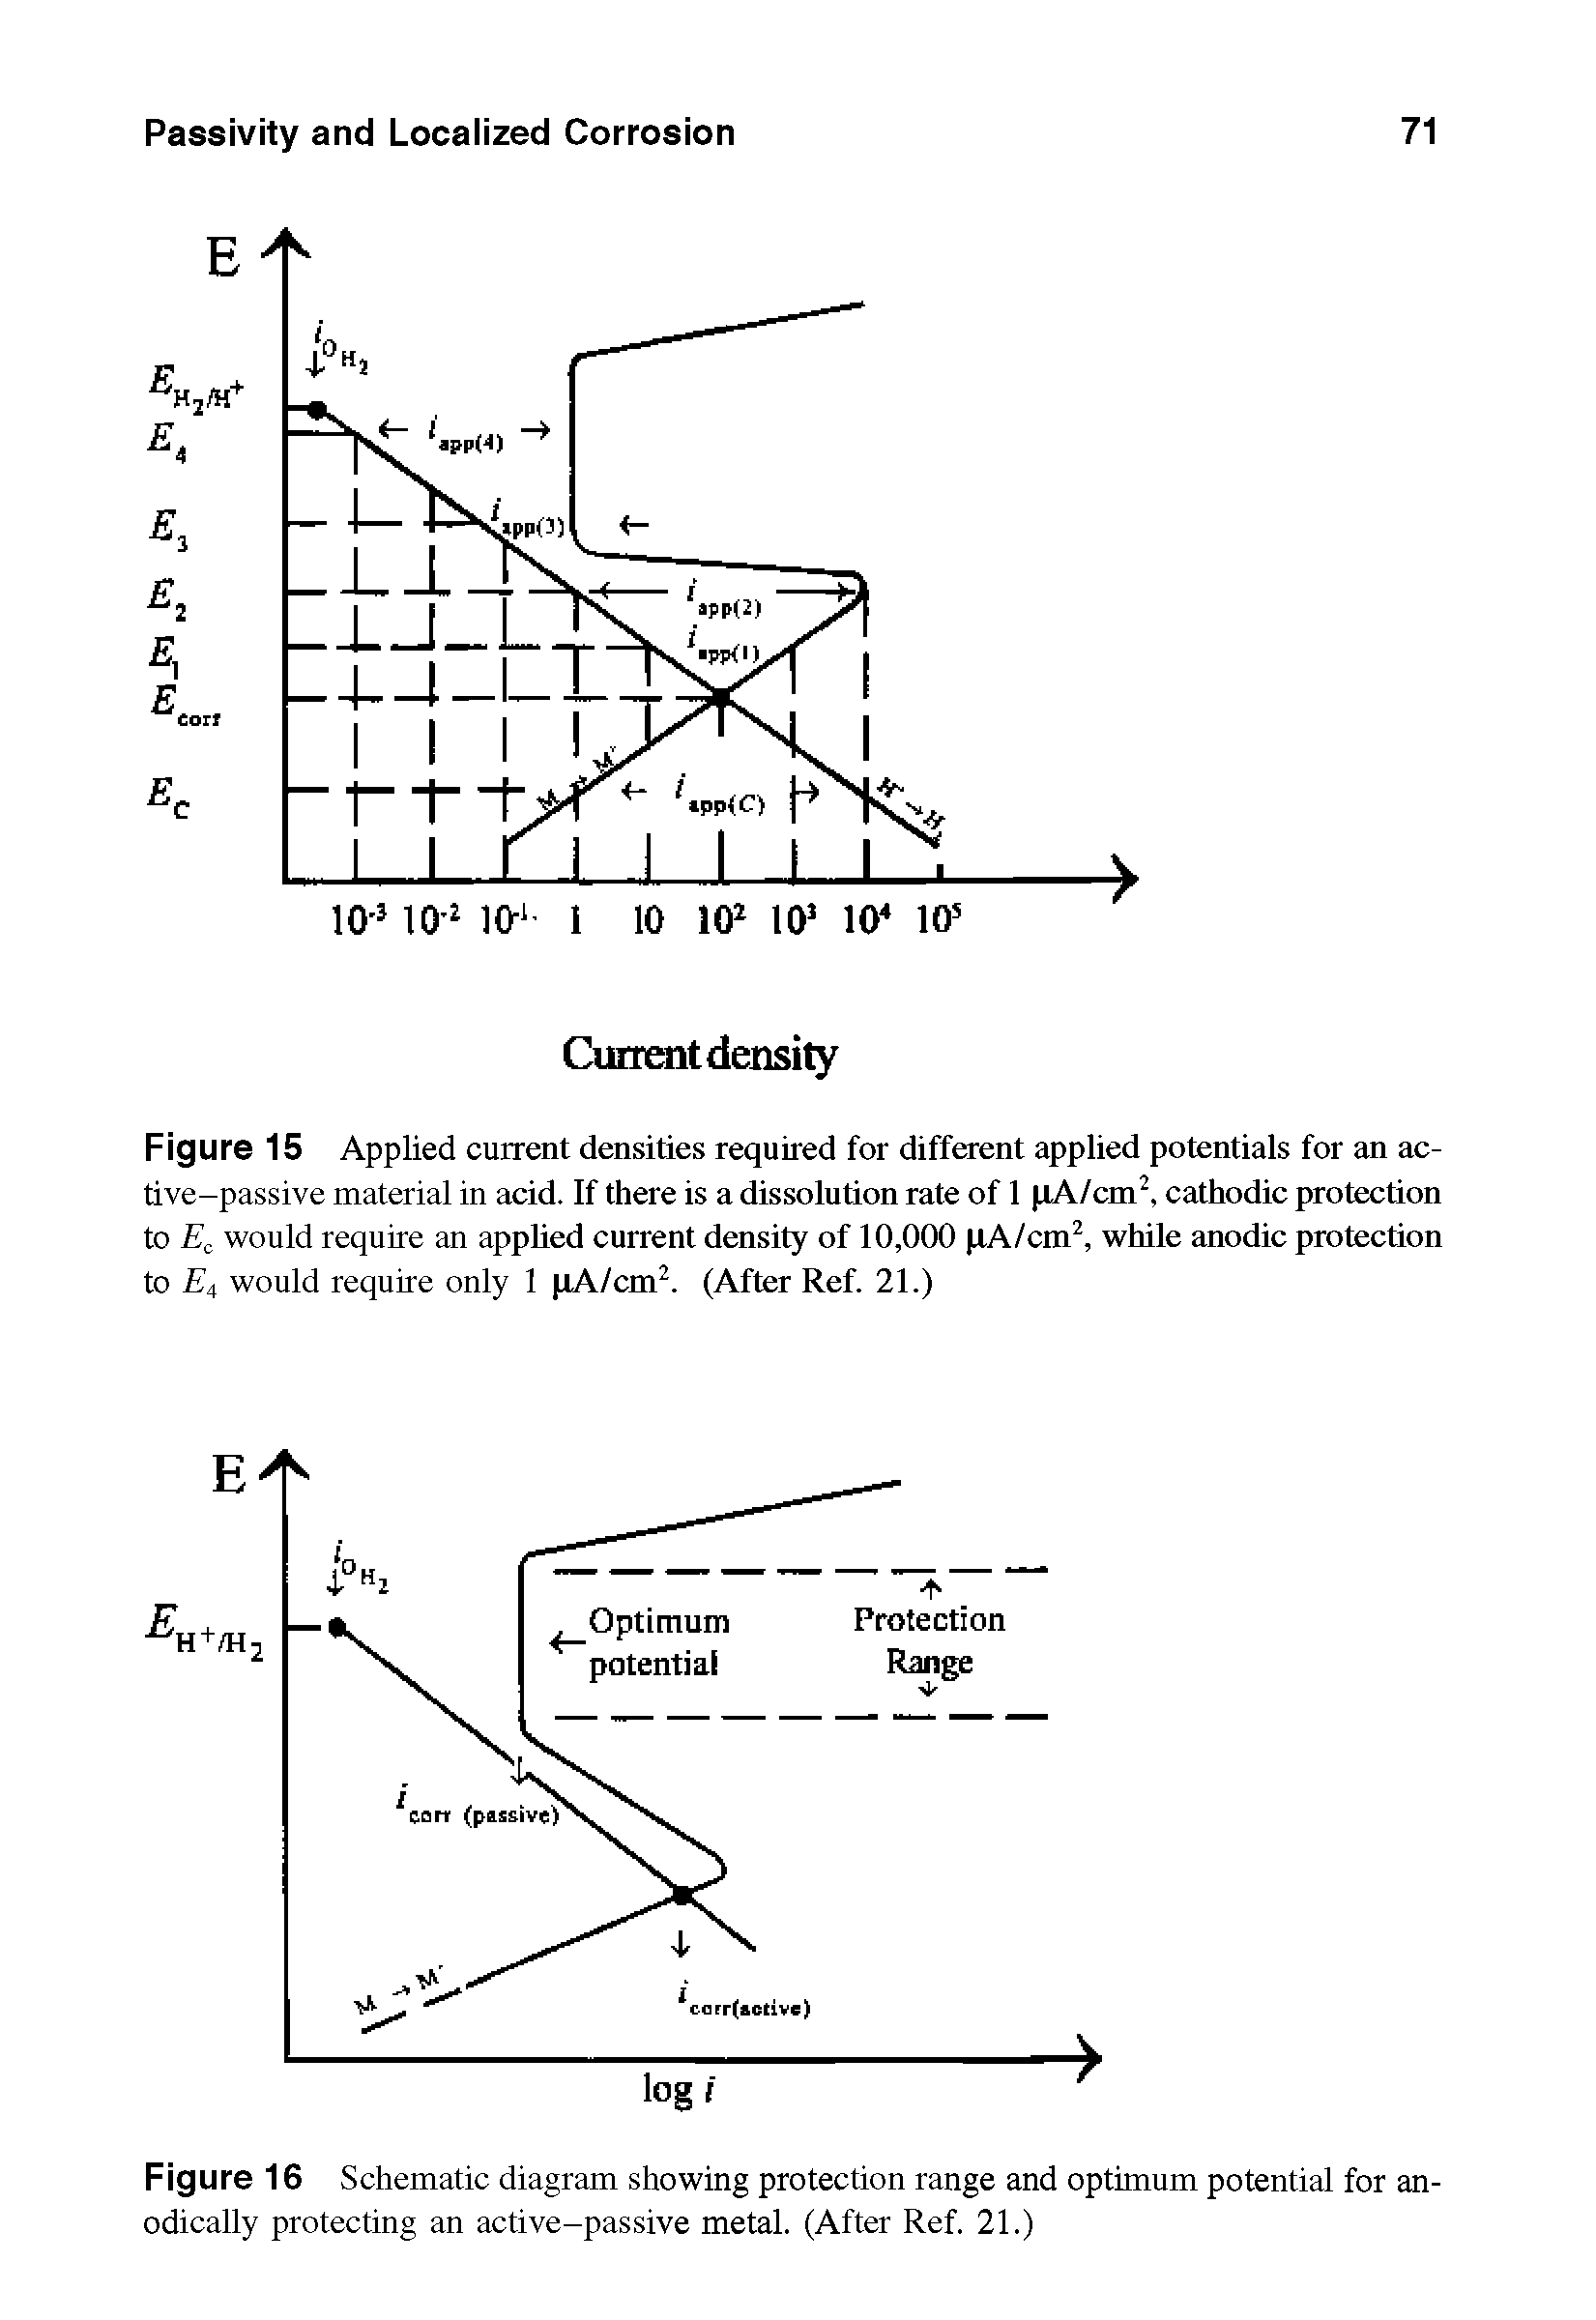 Figure 15 Applied current densities required for different applied potentials for an active-passive material in acid. If there is a dissolution rate of 1 pA/cm2, cathodic protection to Ec would require an applied current density of 10,000 pA/cm2, while anodic protection to E4 would require only 1 pA/cm2. (After Ref. 21.)...